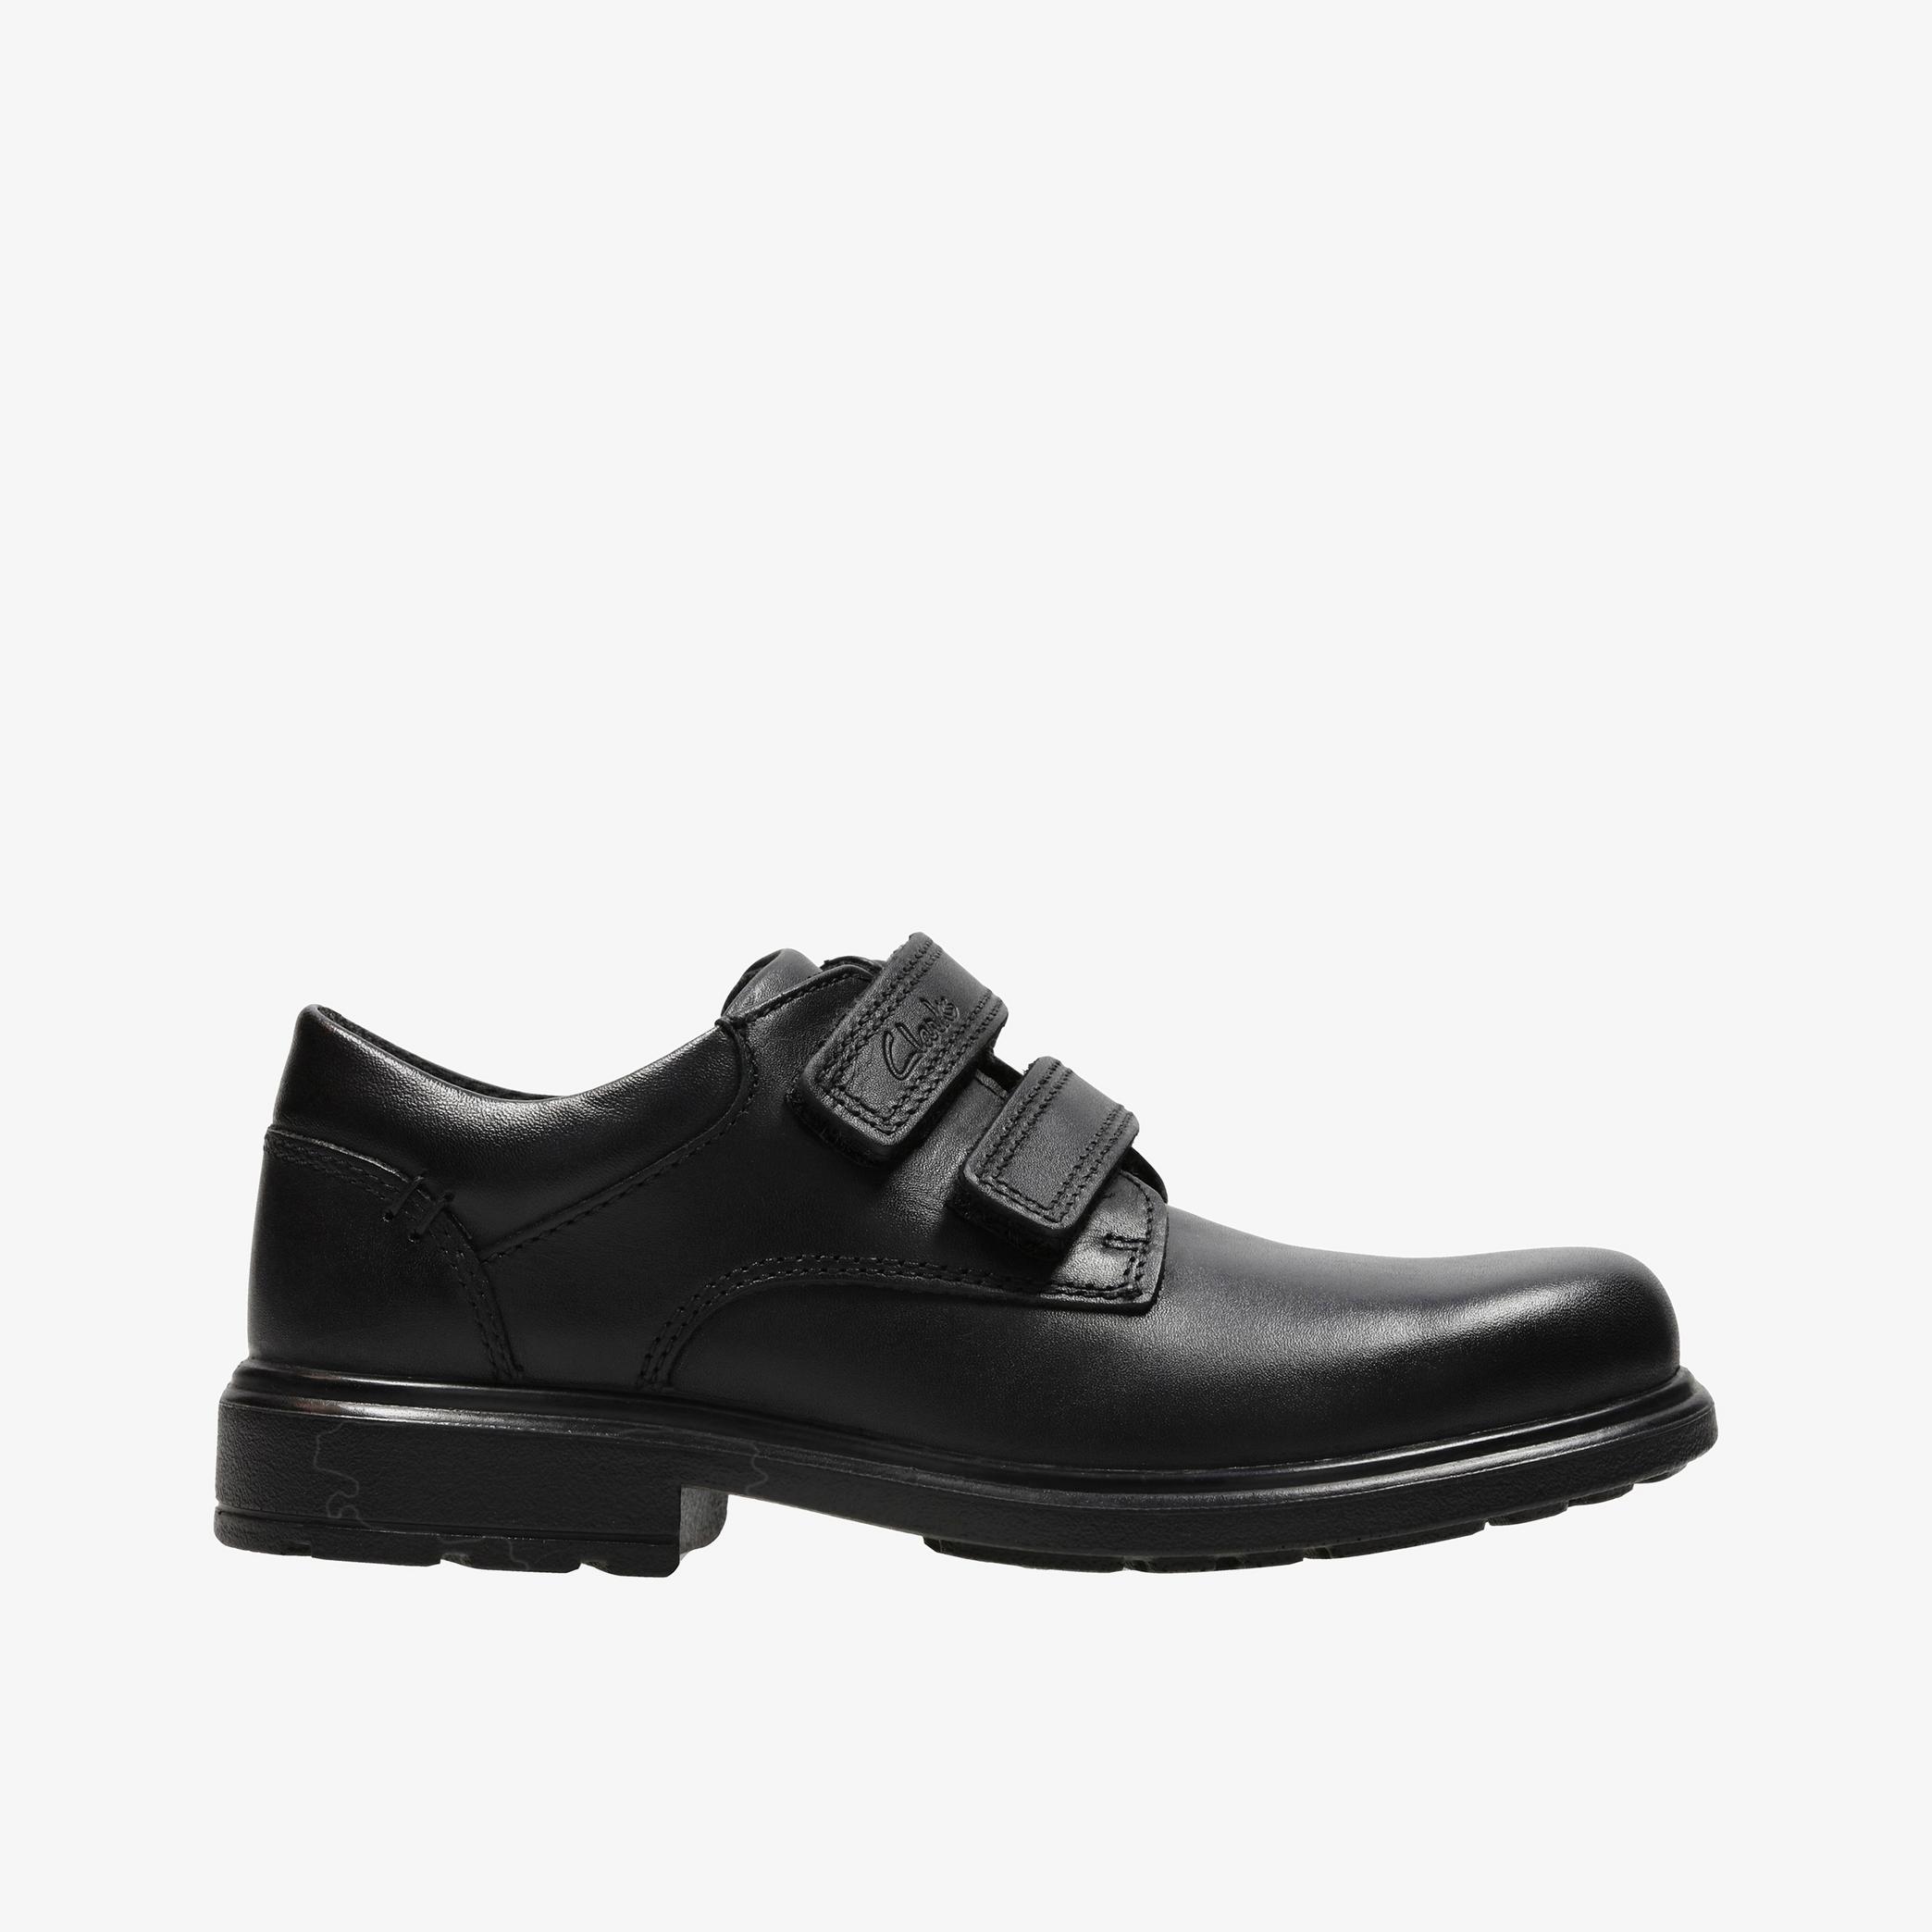 Remi Pace Kid Black Leather Shoes, view 1 of 6